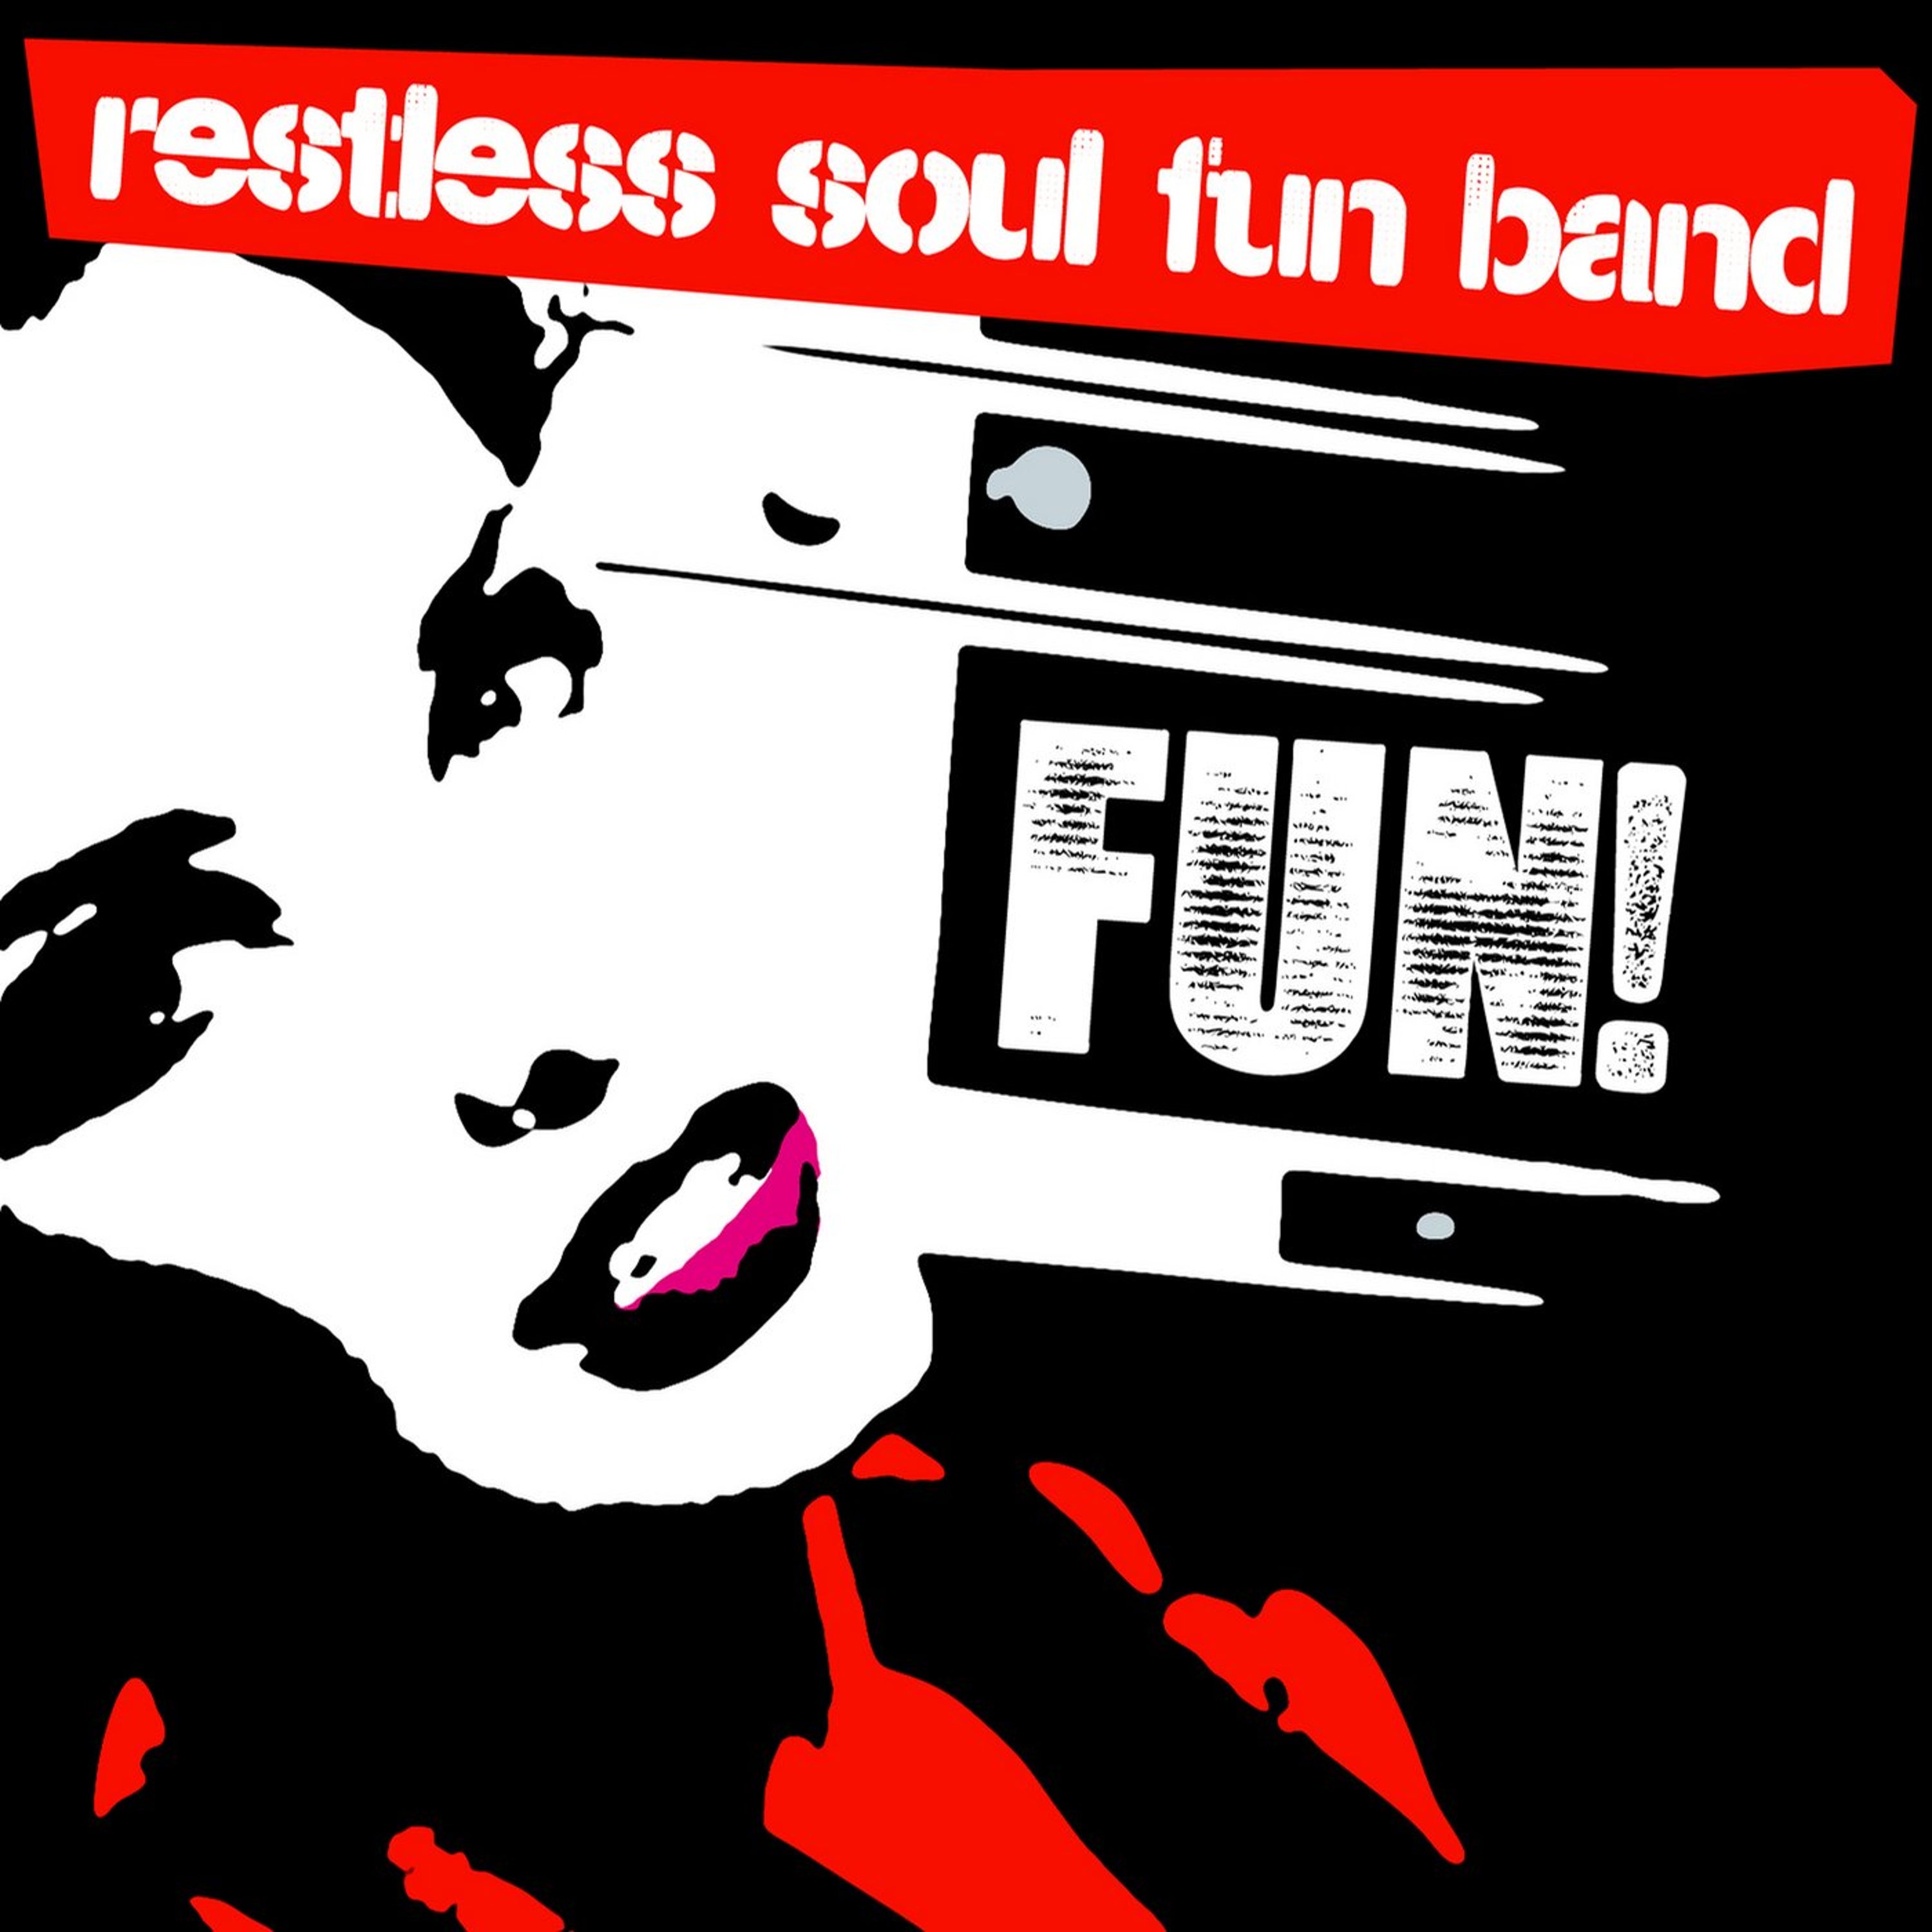 Art for Missing by Restless Soul Fun Band